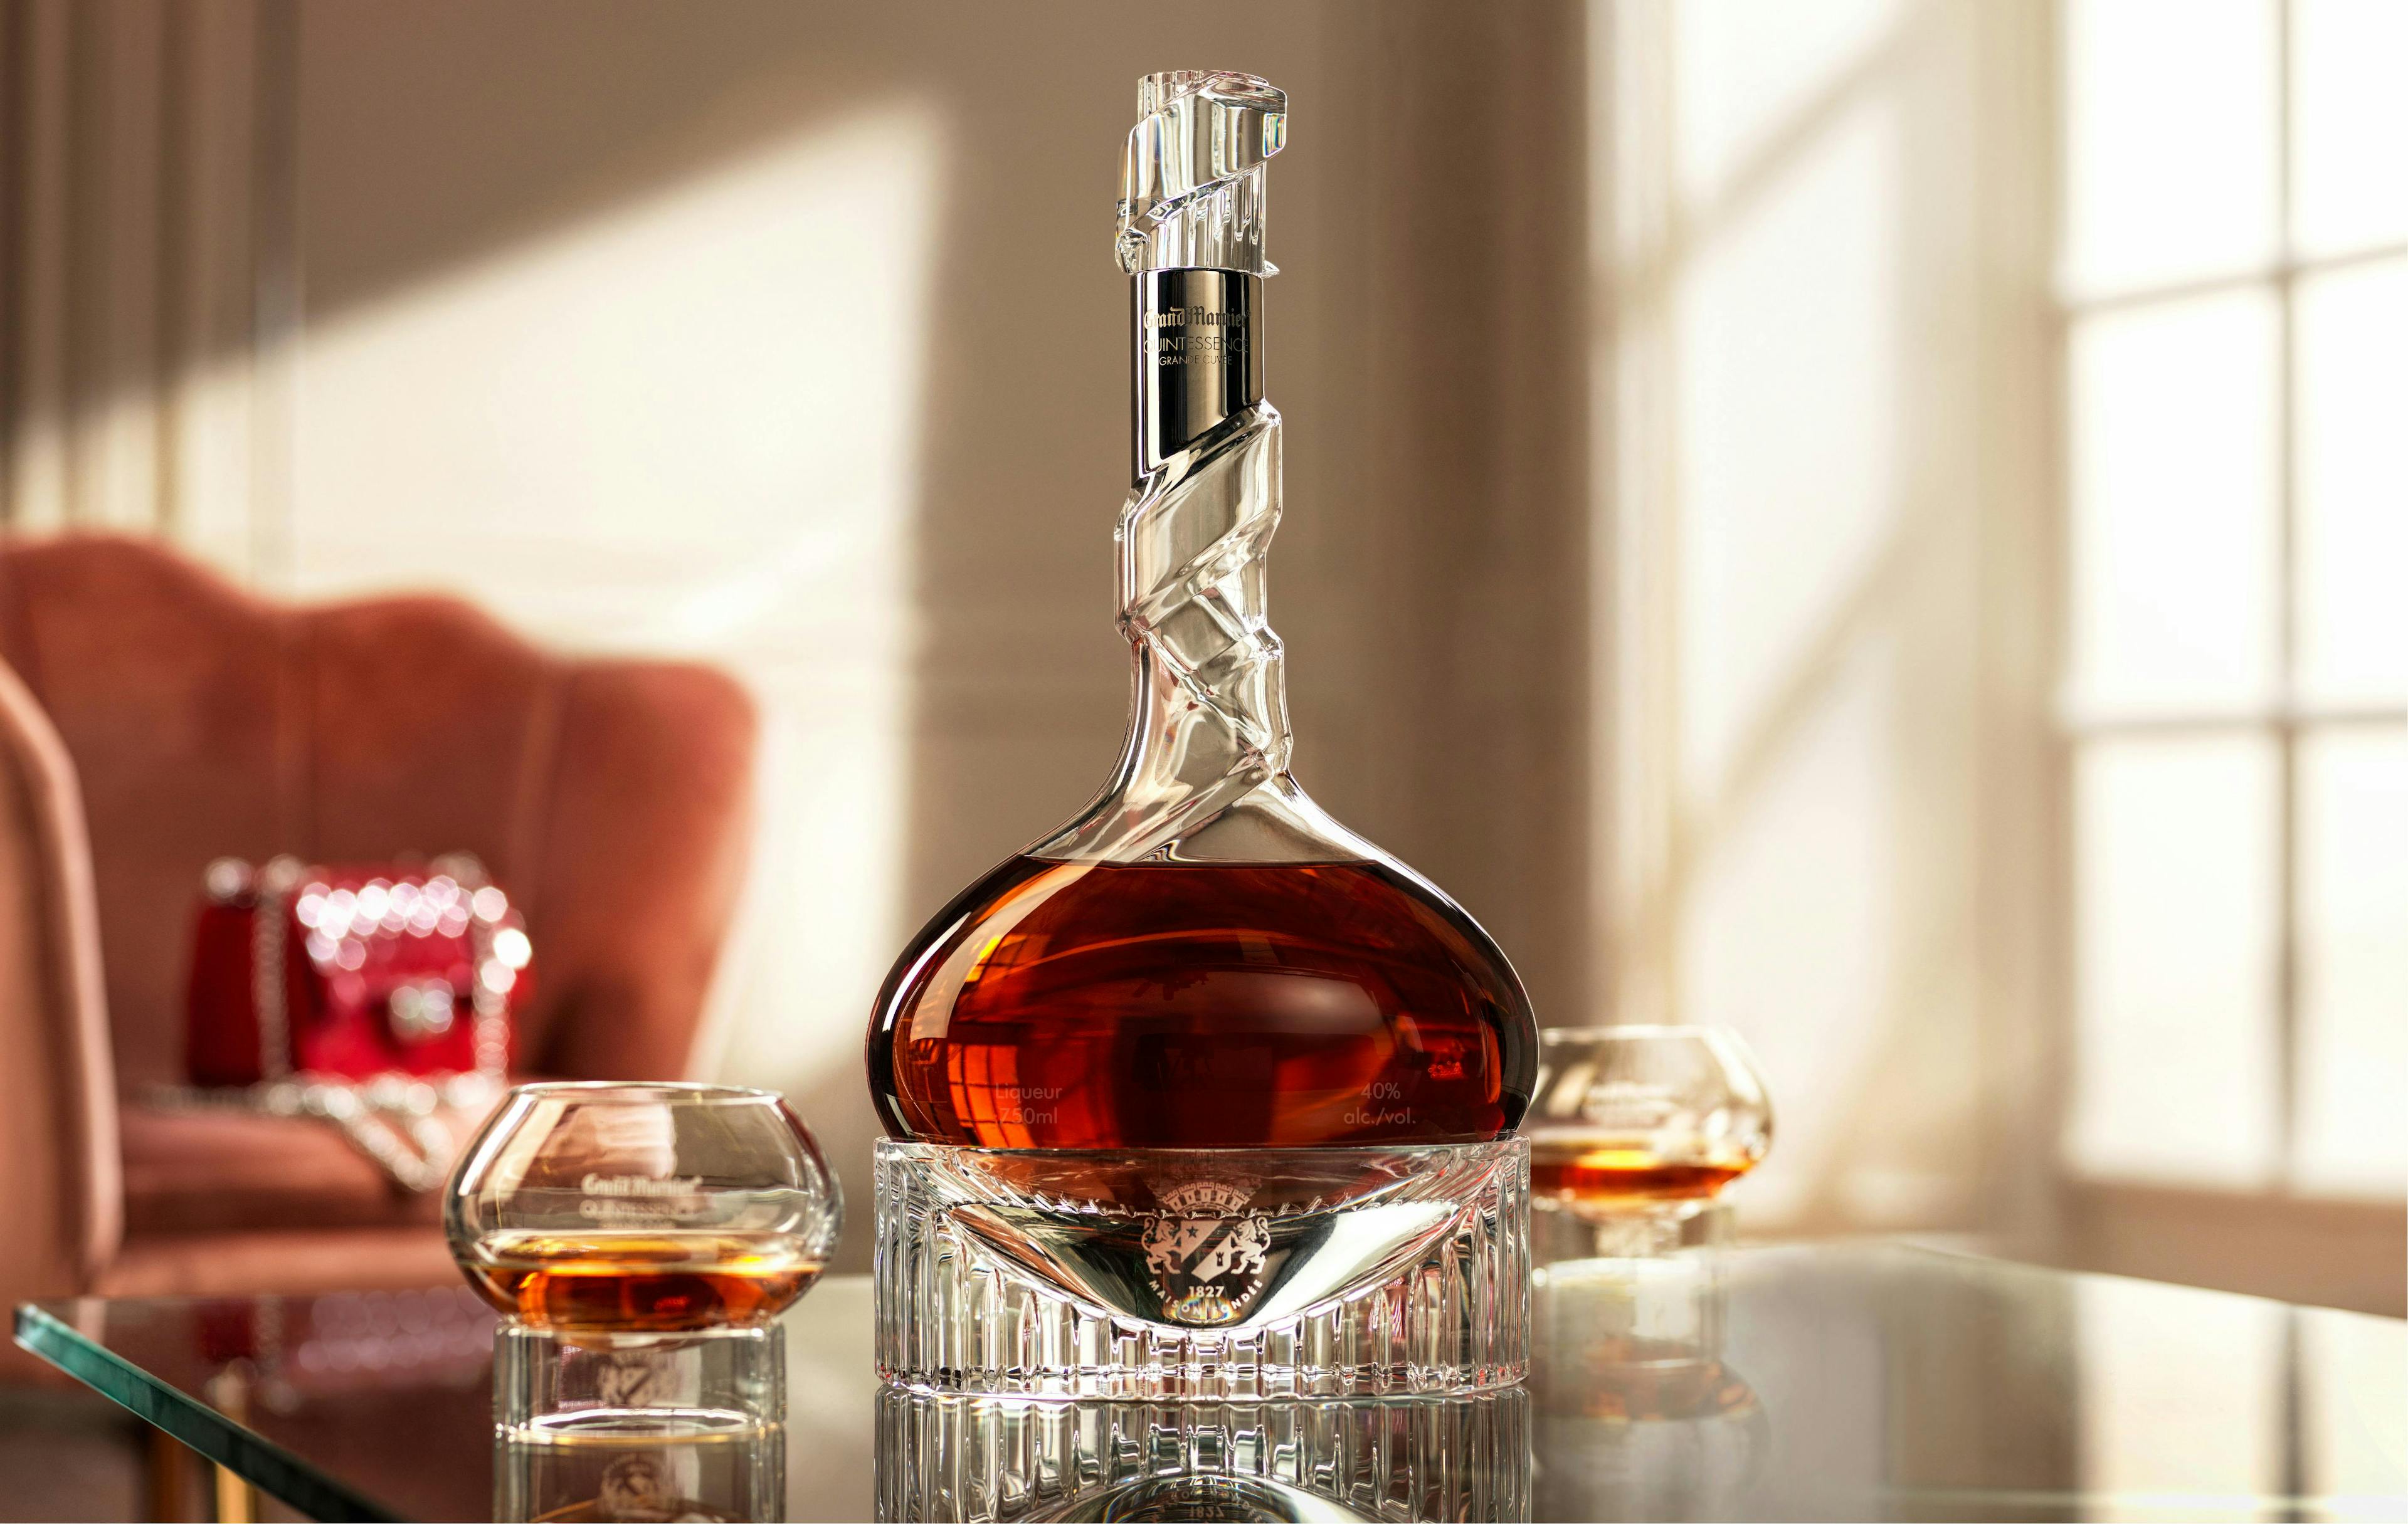 Grand Marnier Quintessence in a Baccarat Crystal Bottle on a Glass Table